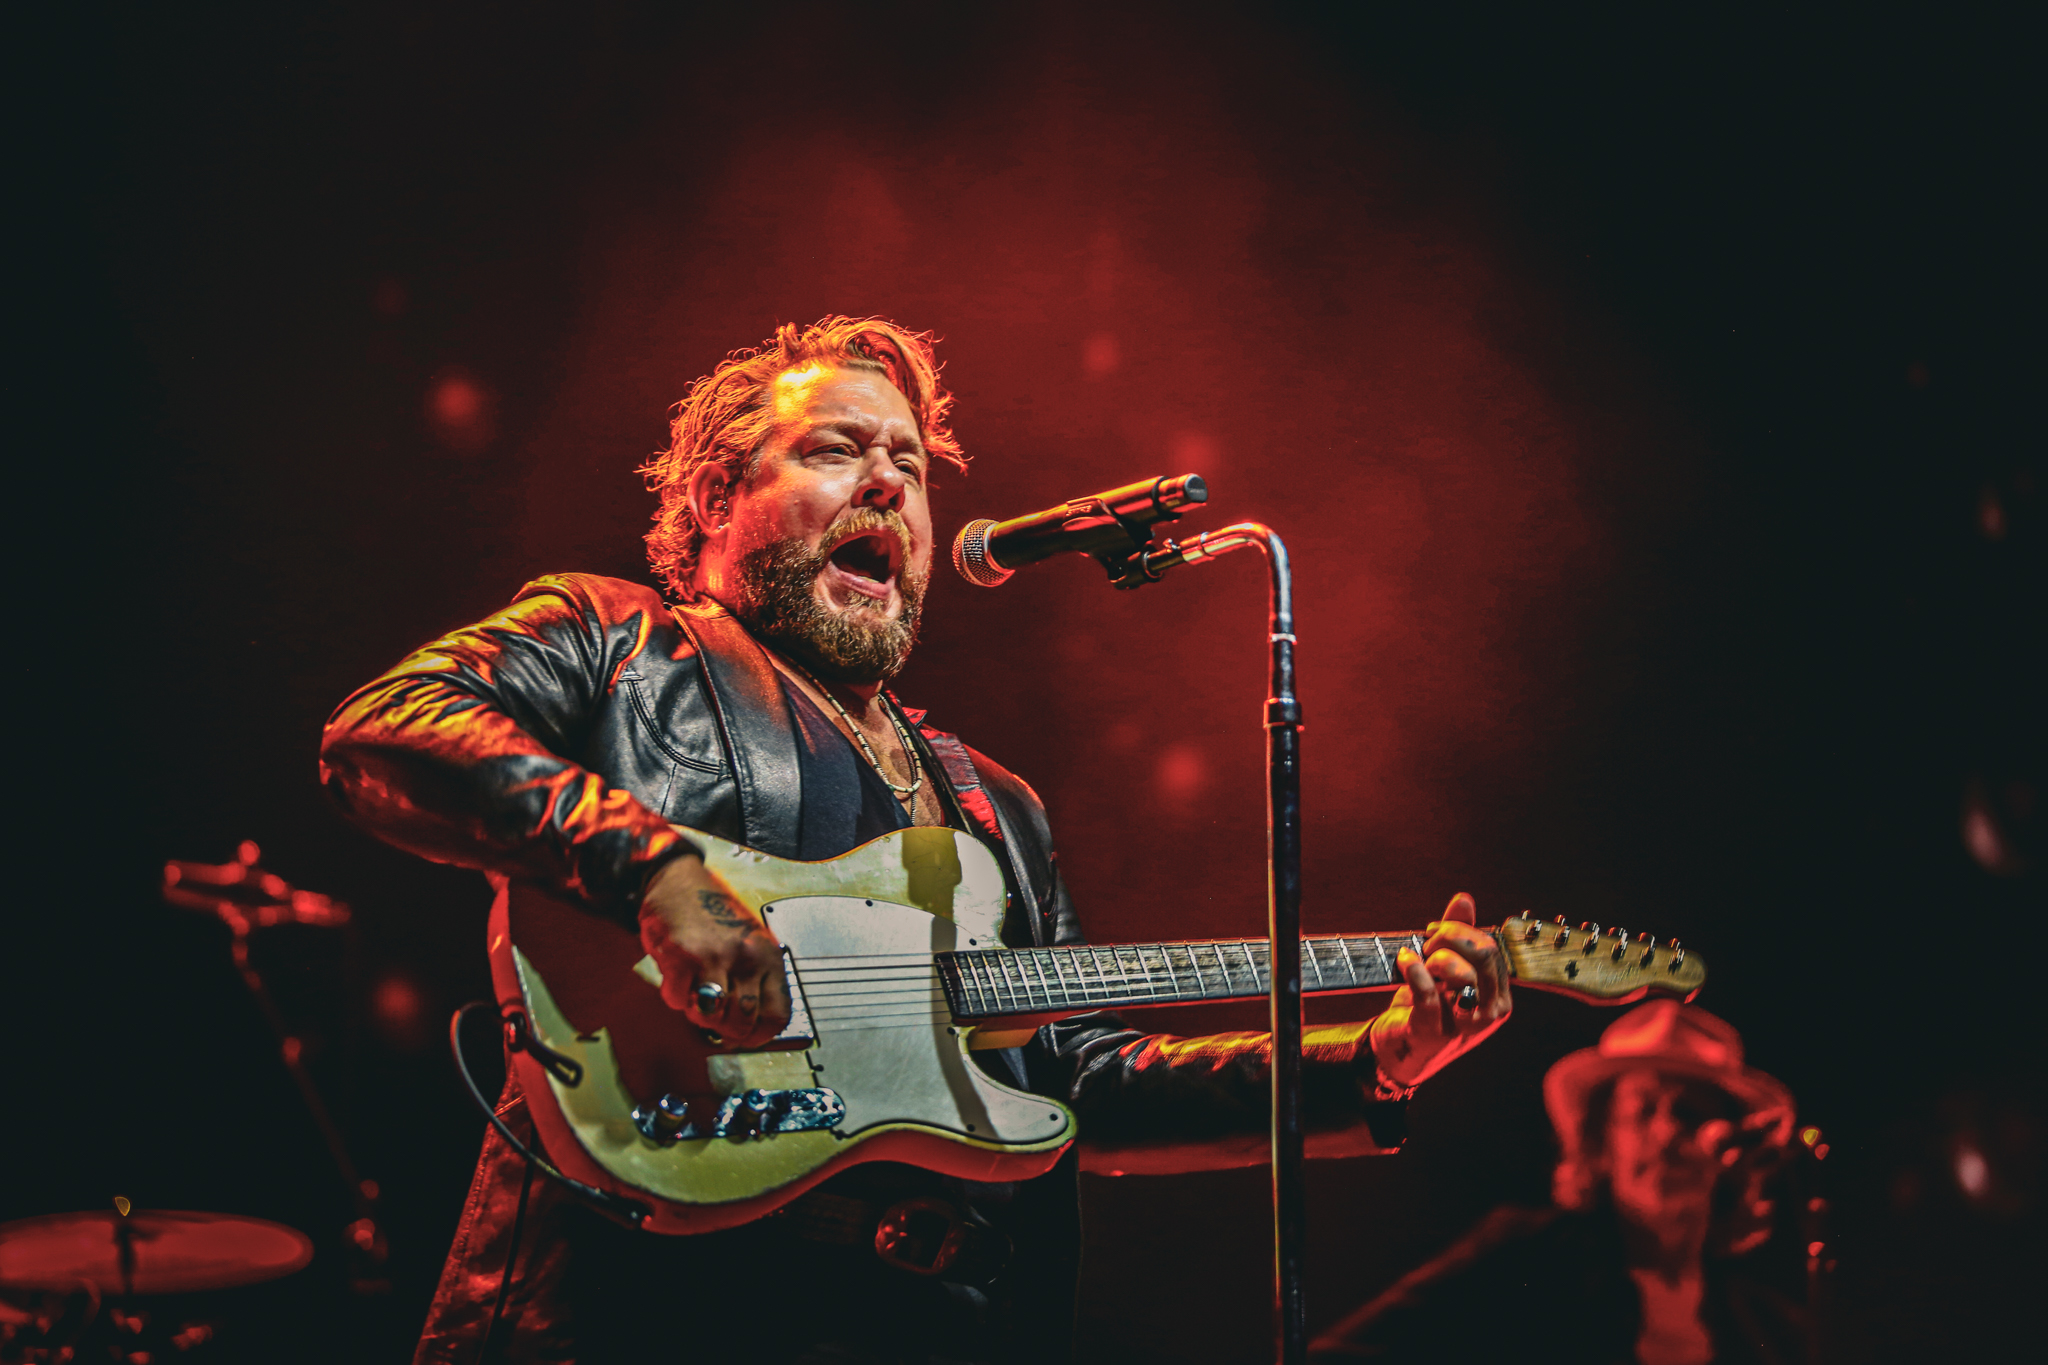 Nathaniel Rateliff and the Nigh Sweats perform a live show in Asheville, NC. (IMAGES)